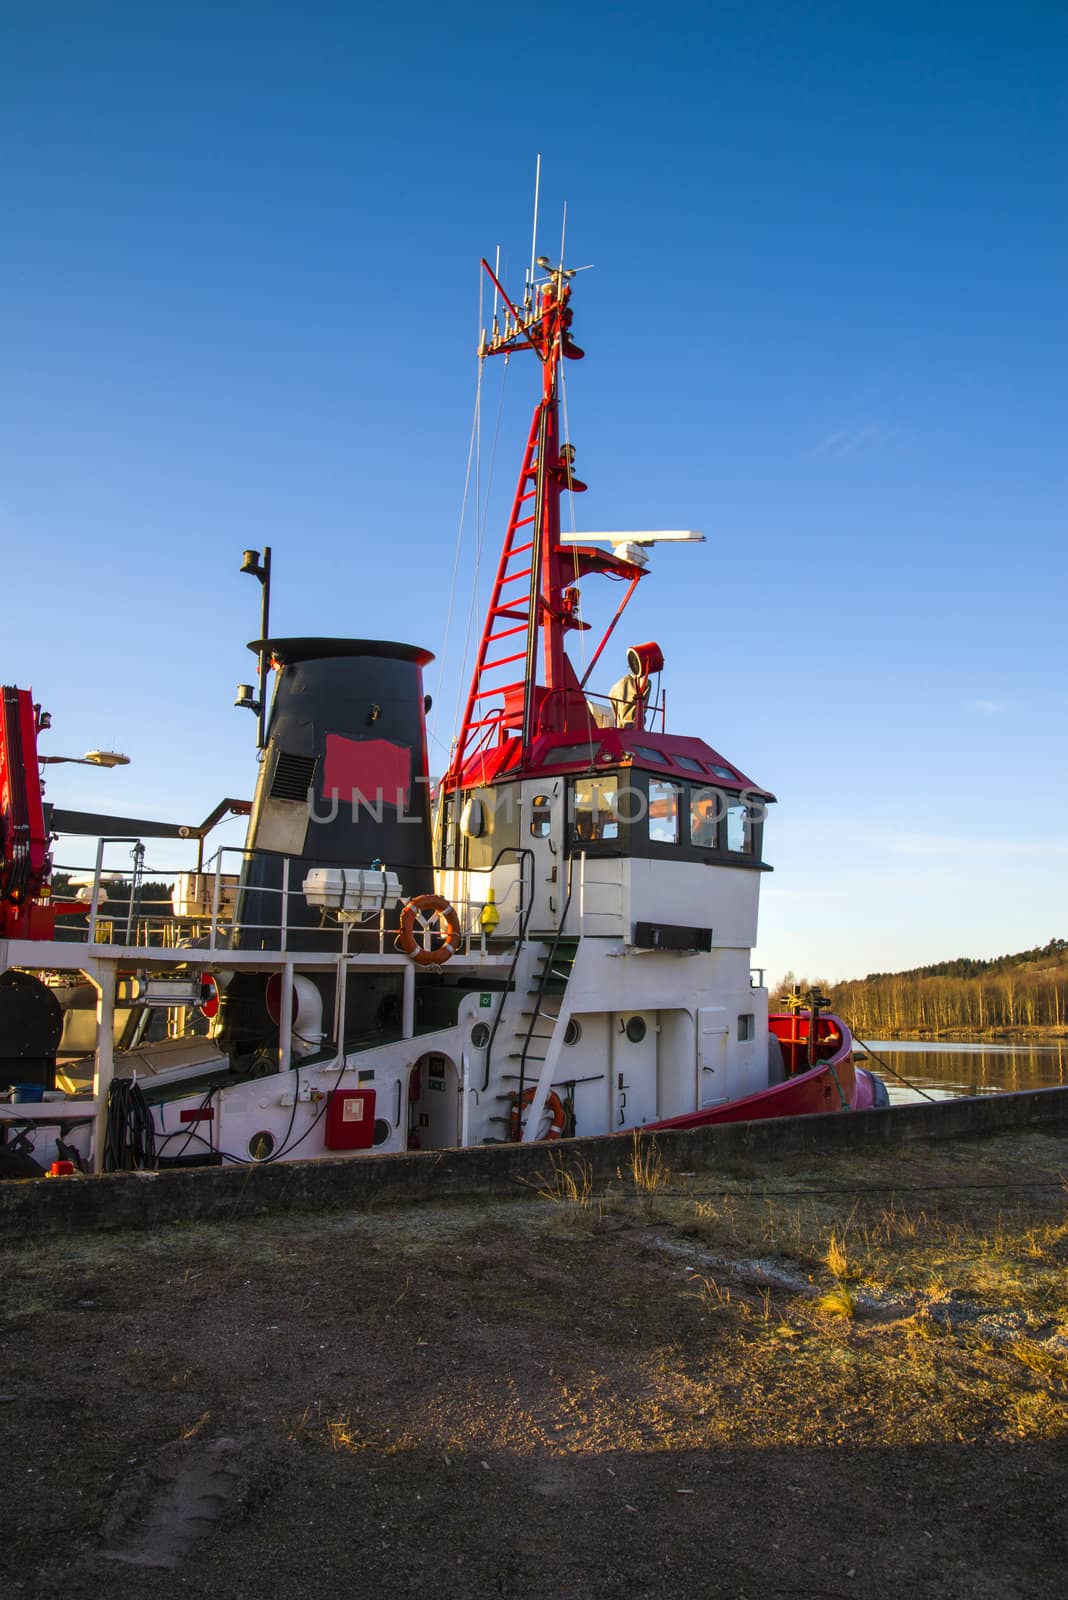 tug frier is moored to the quay at the port of halden, image is shot in december 2012.